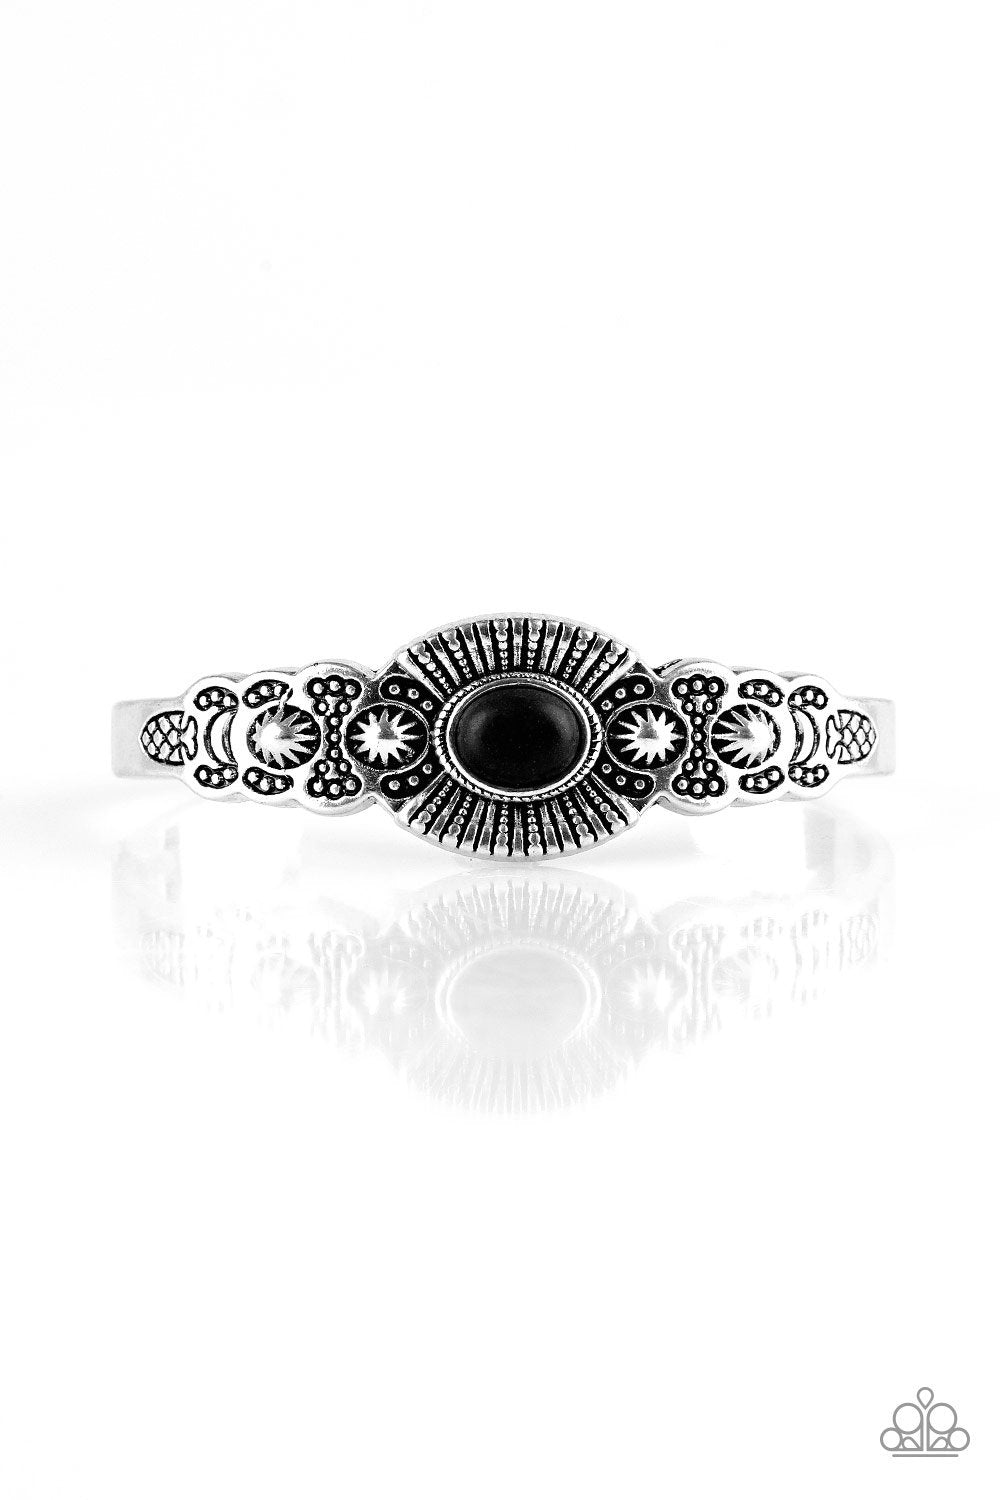 Wide Open Mesas Black Stone and Silver Cuff Bracelet - Paparazzi Accessories-CarasShop.com - $5 Jewelry by Cara Jewels